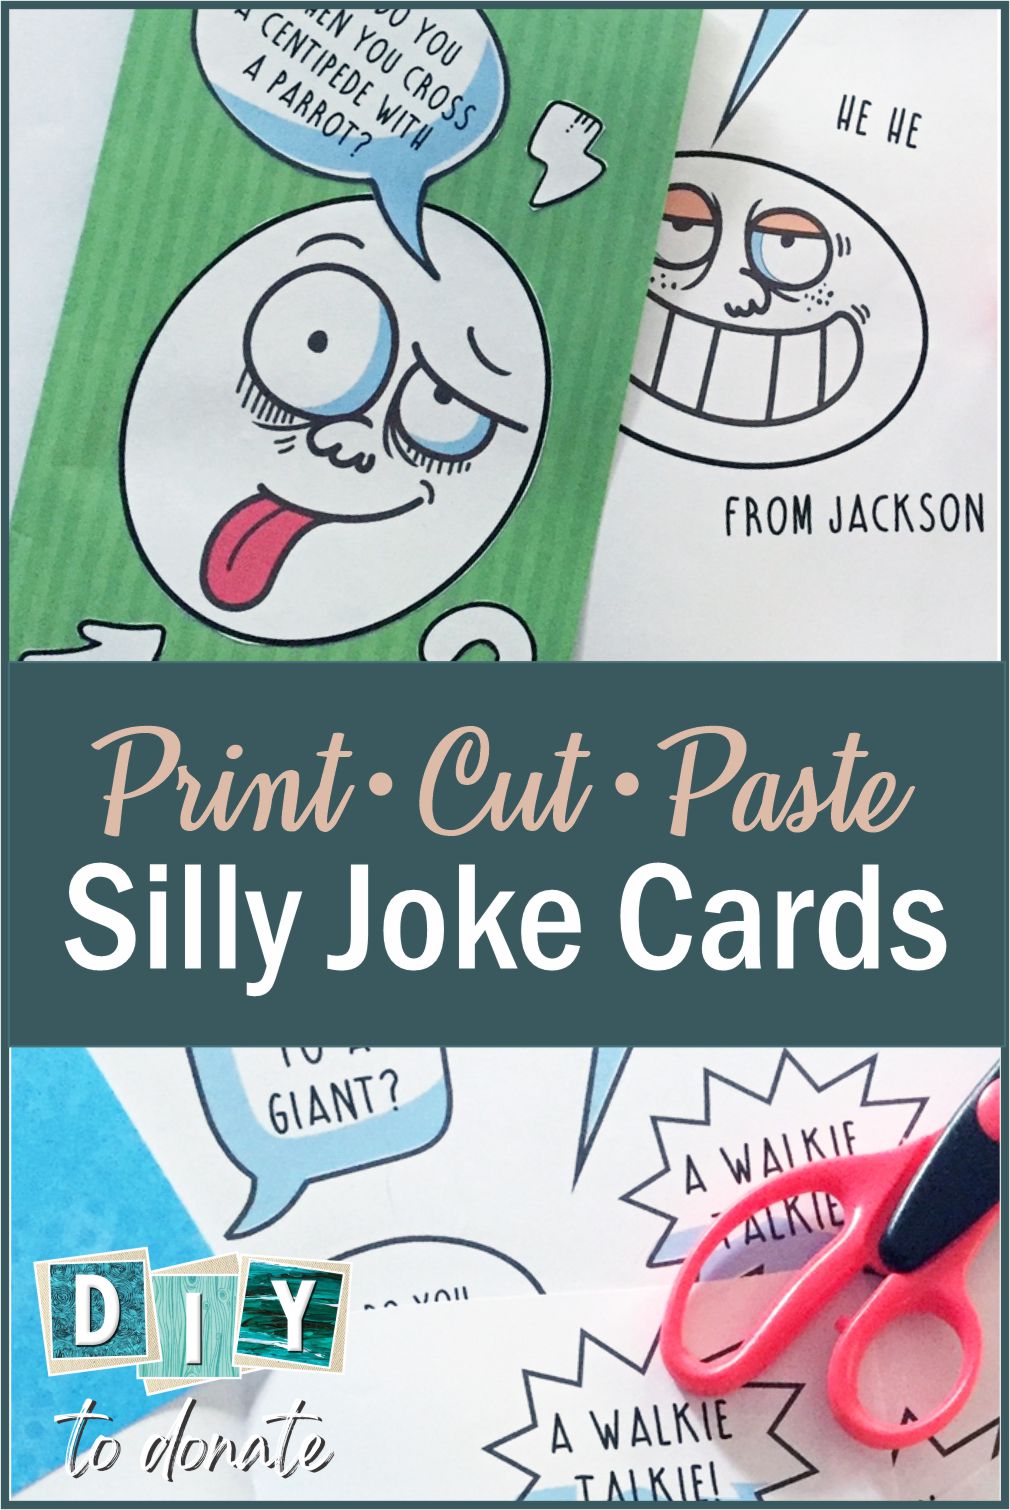 Silly Joke Cards Kids can make silly joke cards with our free printables and find out where to donate them. They will be putting a smile on another child's face. #diytodonate #jokecards #cards #makekidssmiles #jokes #freeprintables #donations #smile